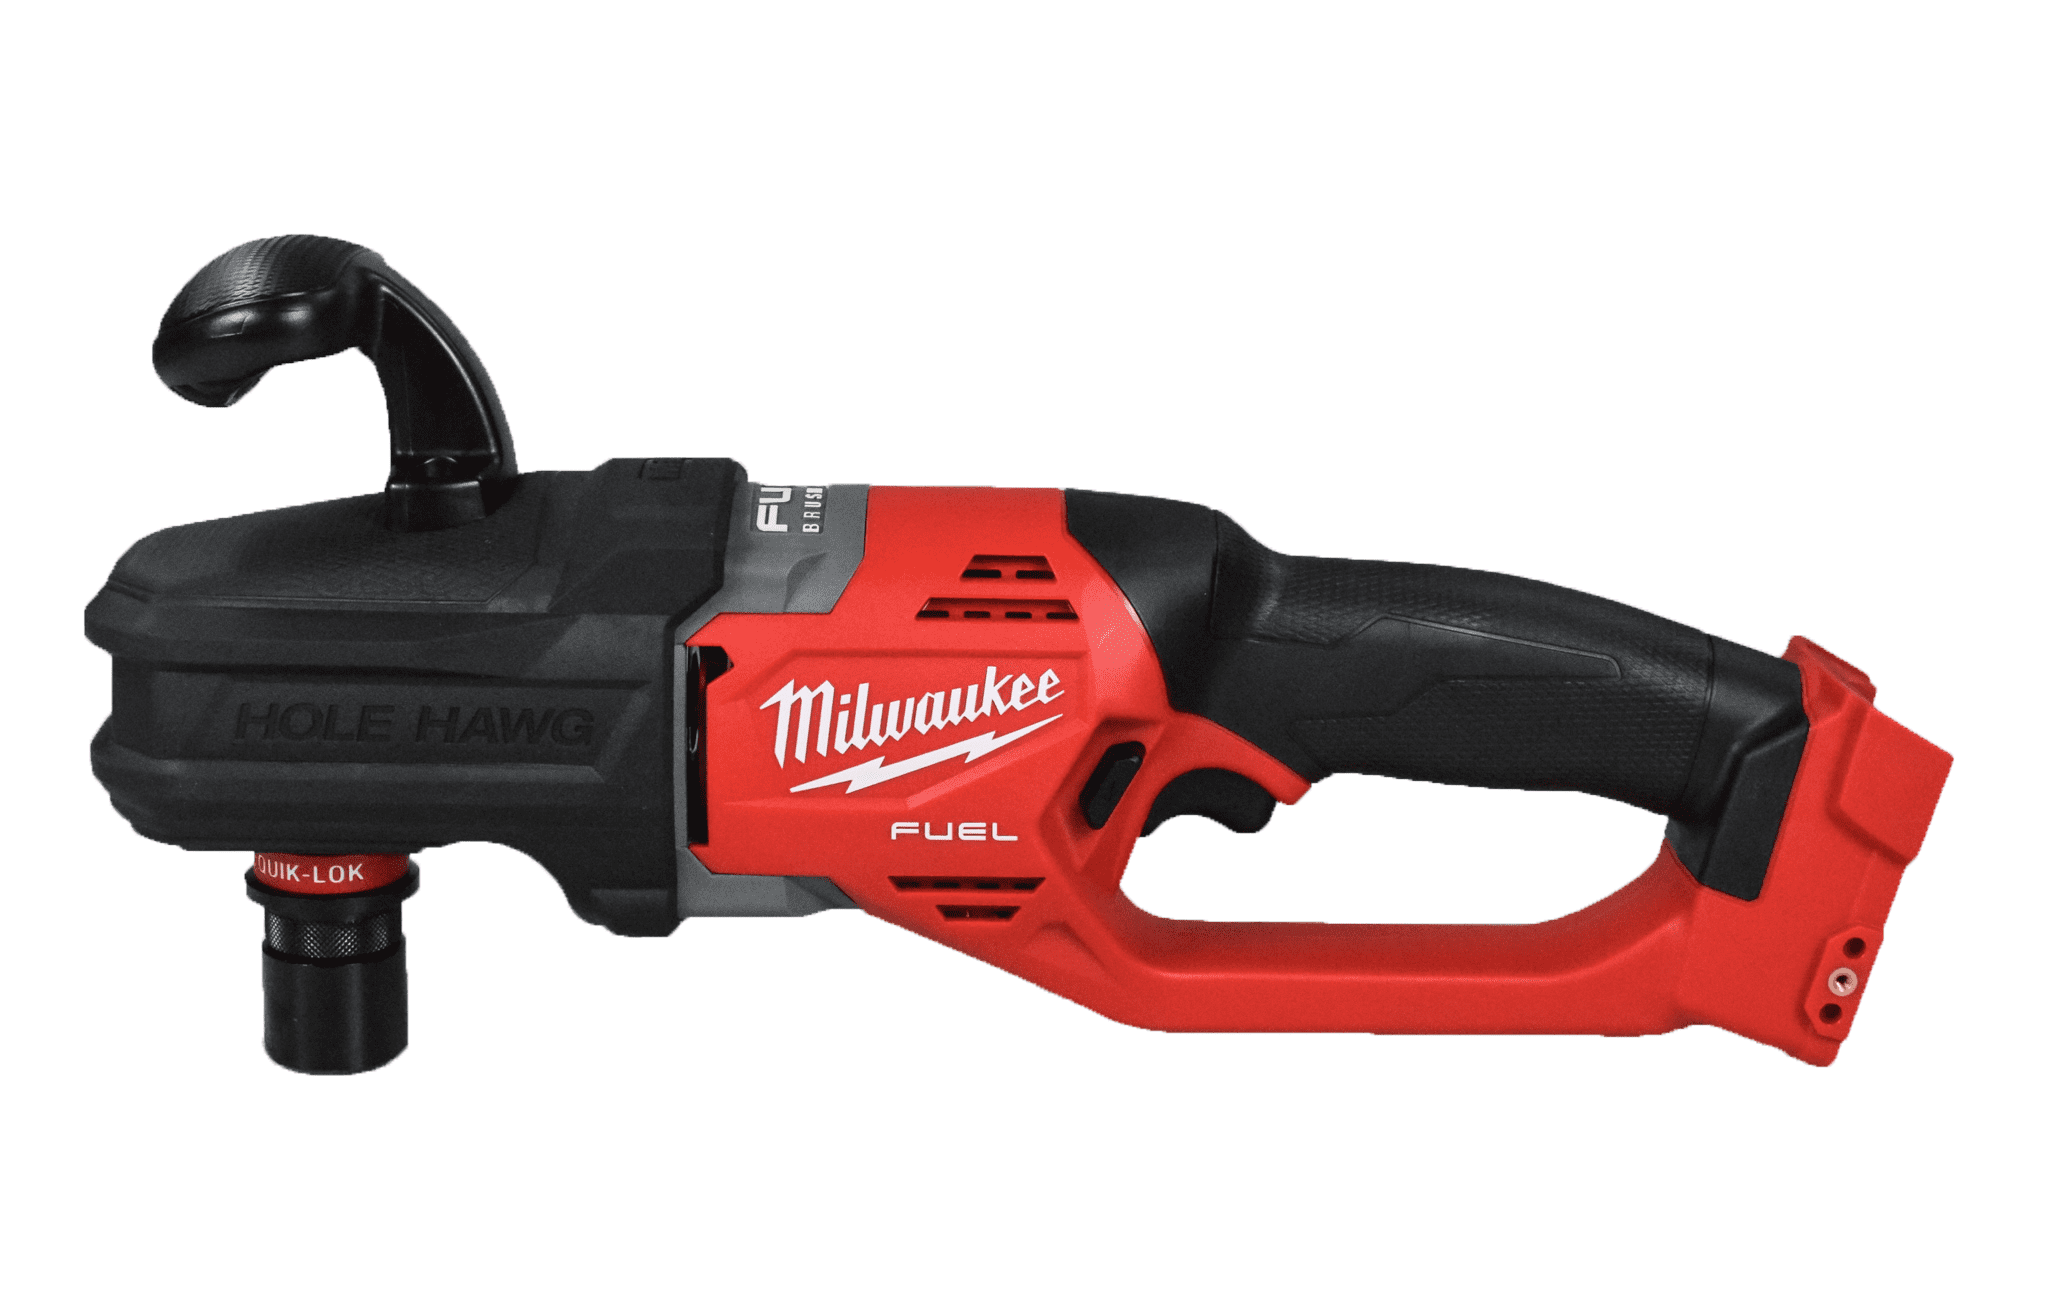 Milwaukee 2808-20 M18 FUEL HOLE HAWG Brushless Lithium-Ion Cordless Right  Angle Drill With 7/16 QUIK-LOK (Tool Only)